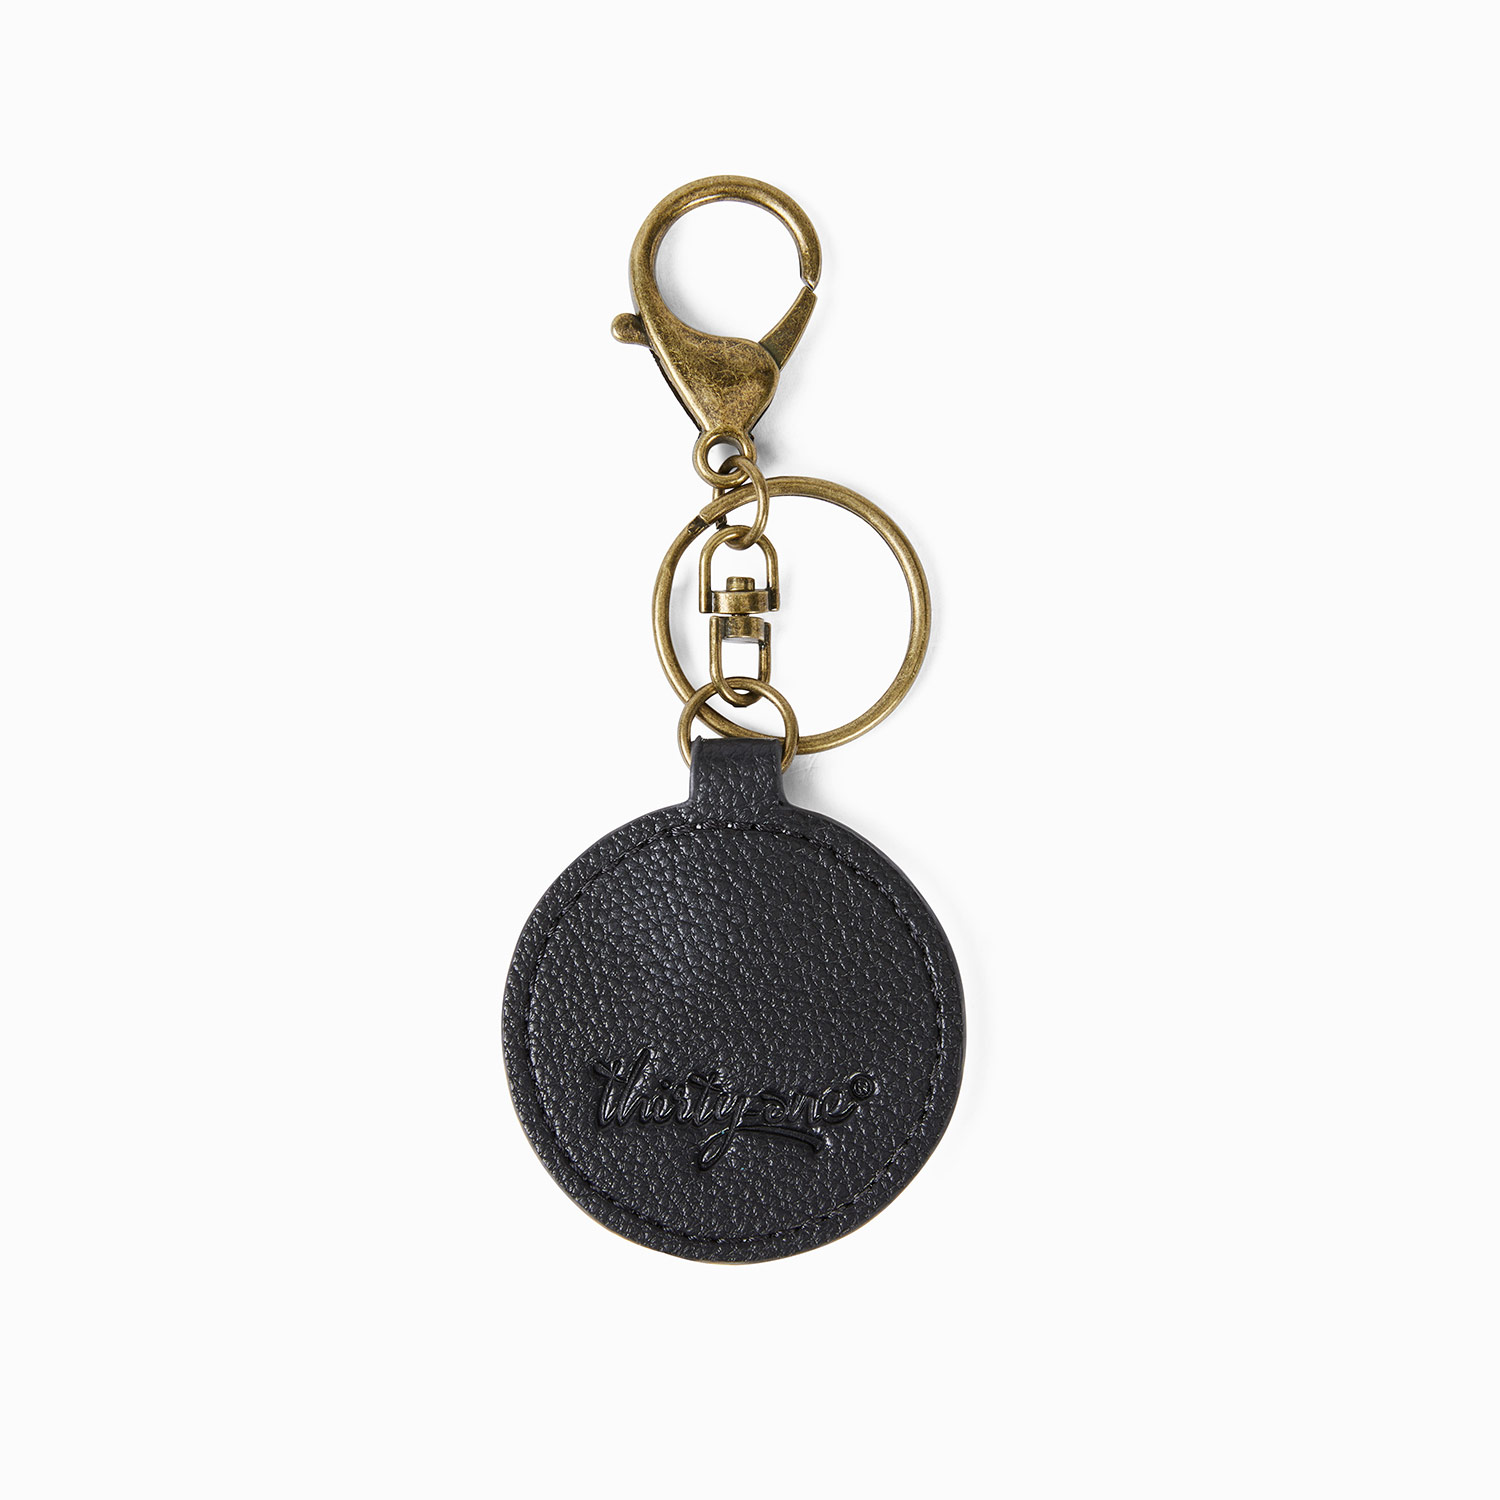 11 Keychain Wallets For When You Just Need the Essentials